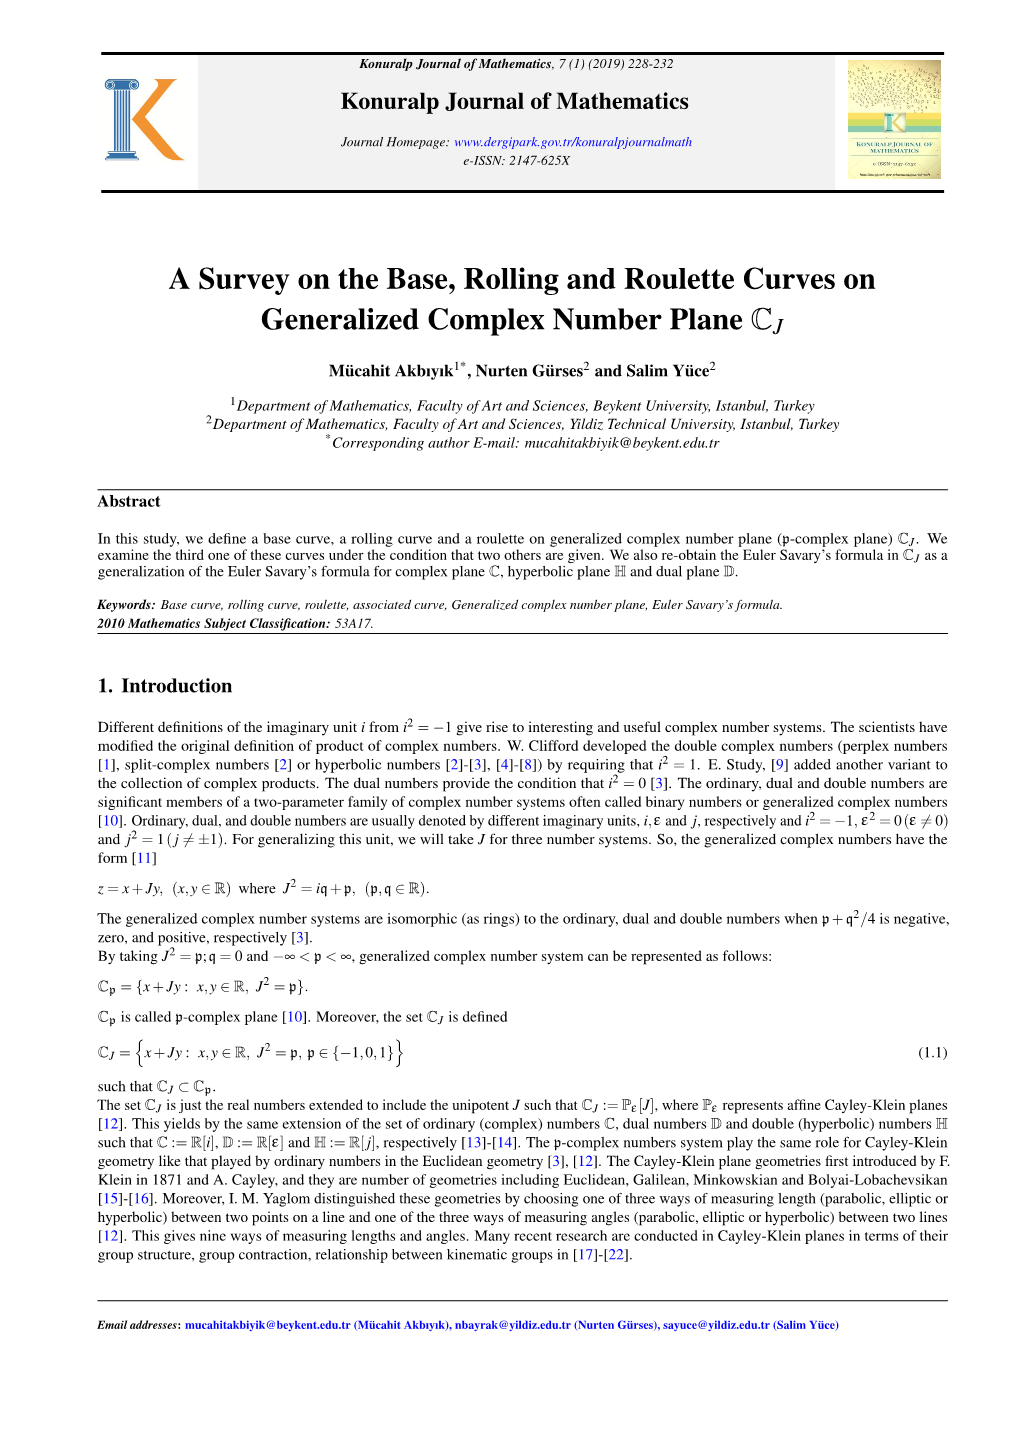 A Survey on the Base, Rolling and Roulette Curves on Generalized Complex Number Plane CJ